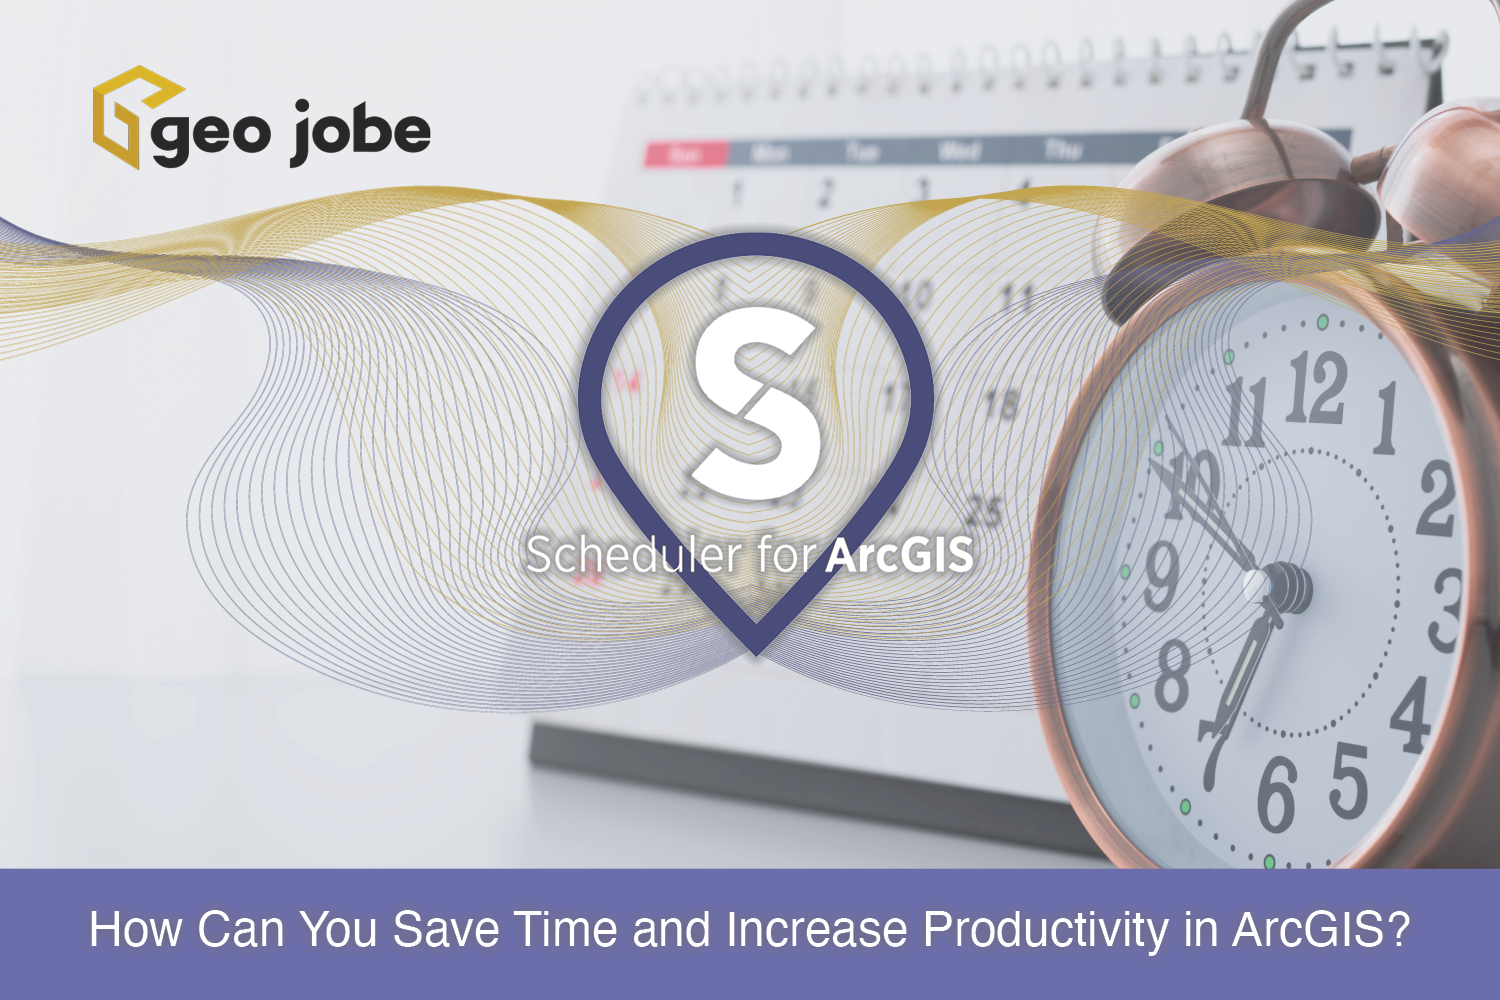 How Can You Save Time and Increase Productivity in ArcGIS?